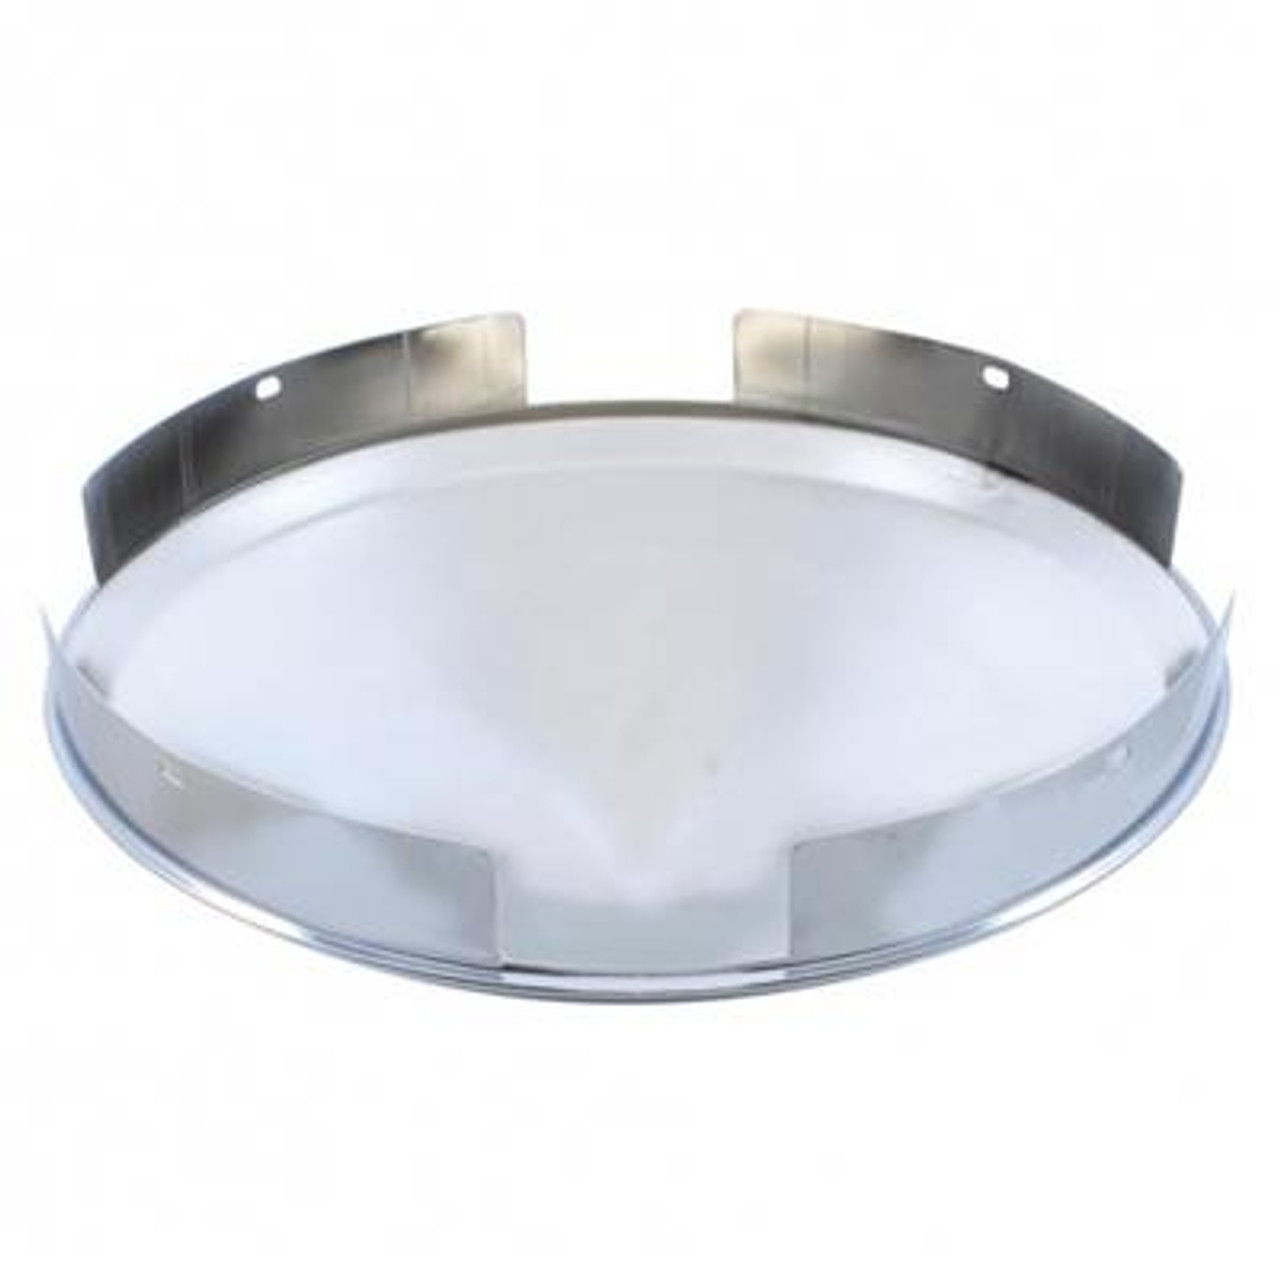 4 Even Notched Stainless Steel Pointed Front Hub Cap - 1" Lip